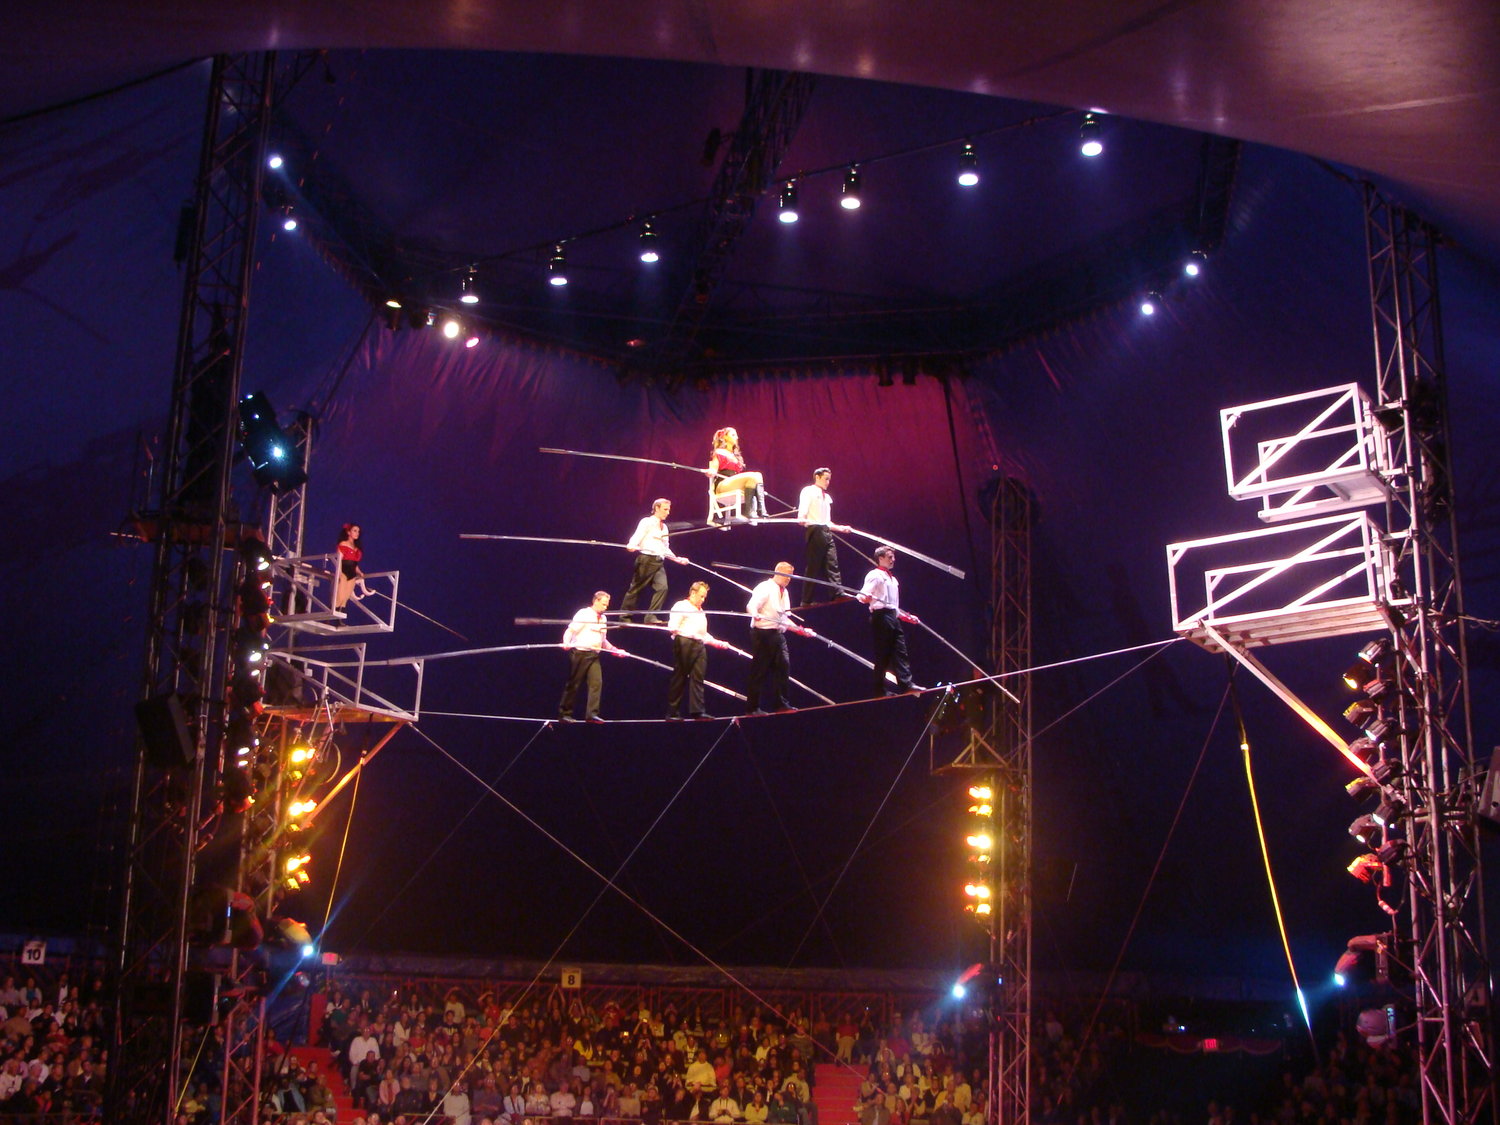 Zirkus will feature high-wire walking, acrobatics and other performances.